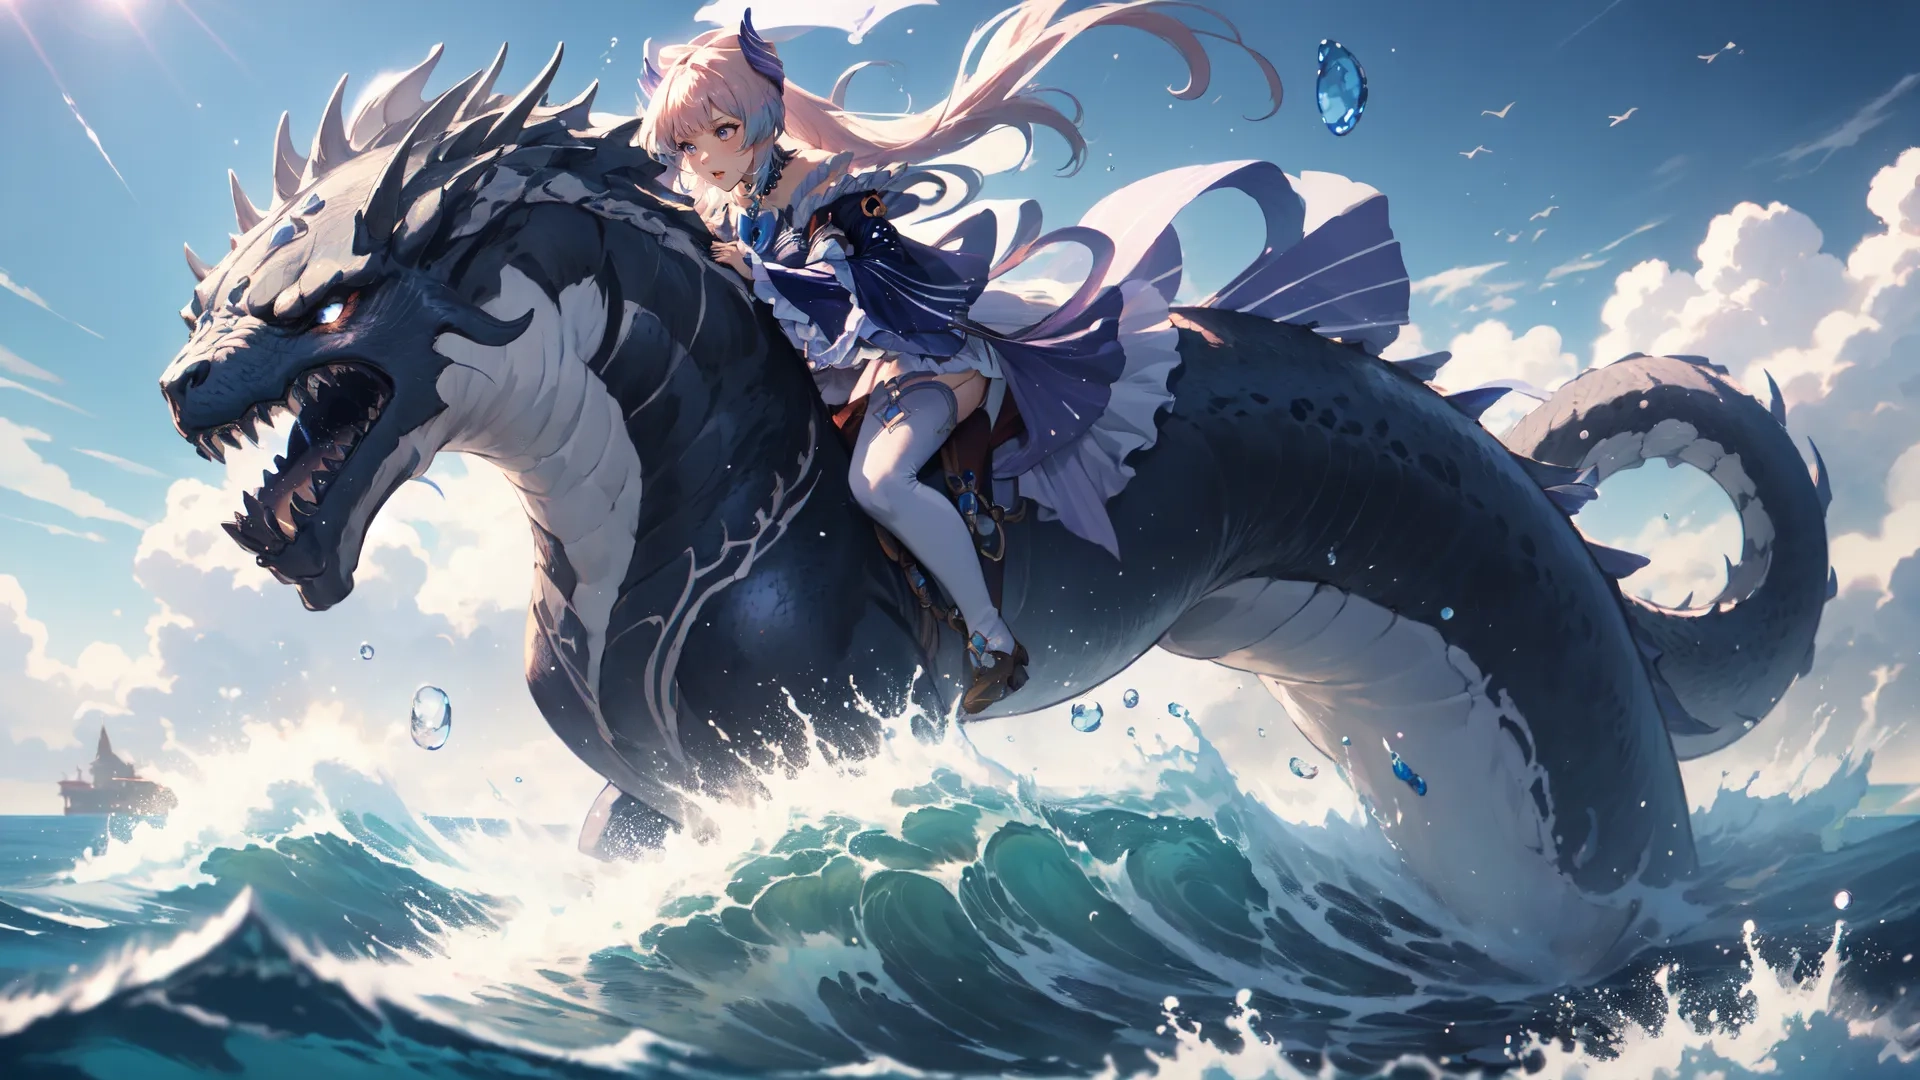 an anime girl in a dress is riding on a large black creature with a white cat with long hair, waves and a sky background
